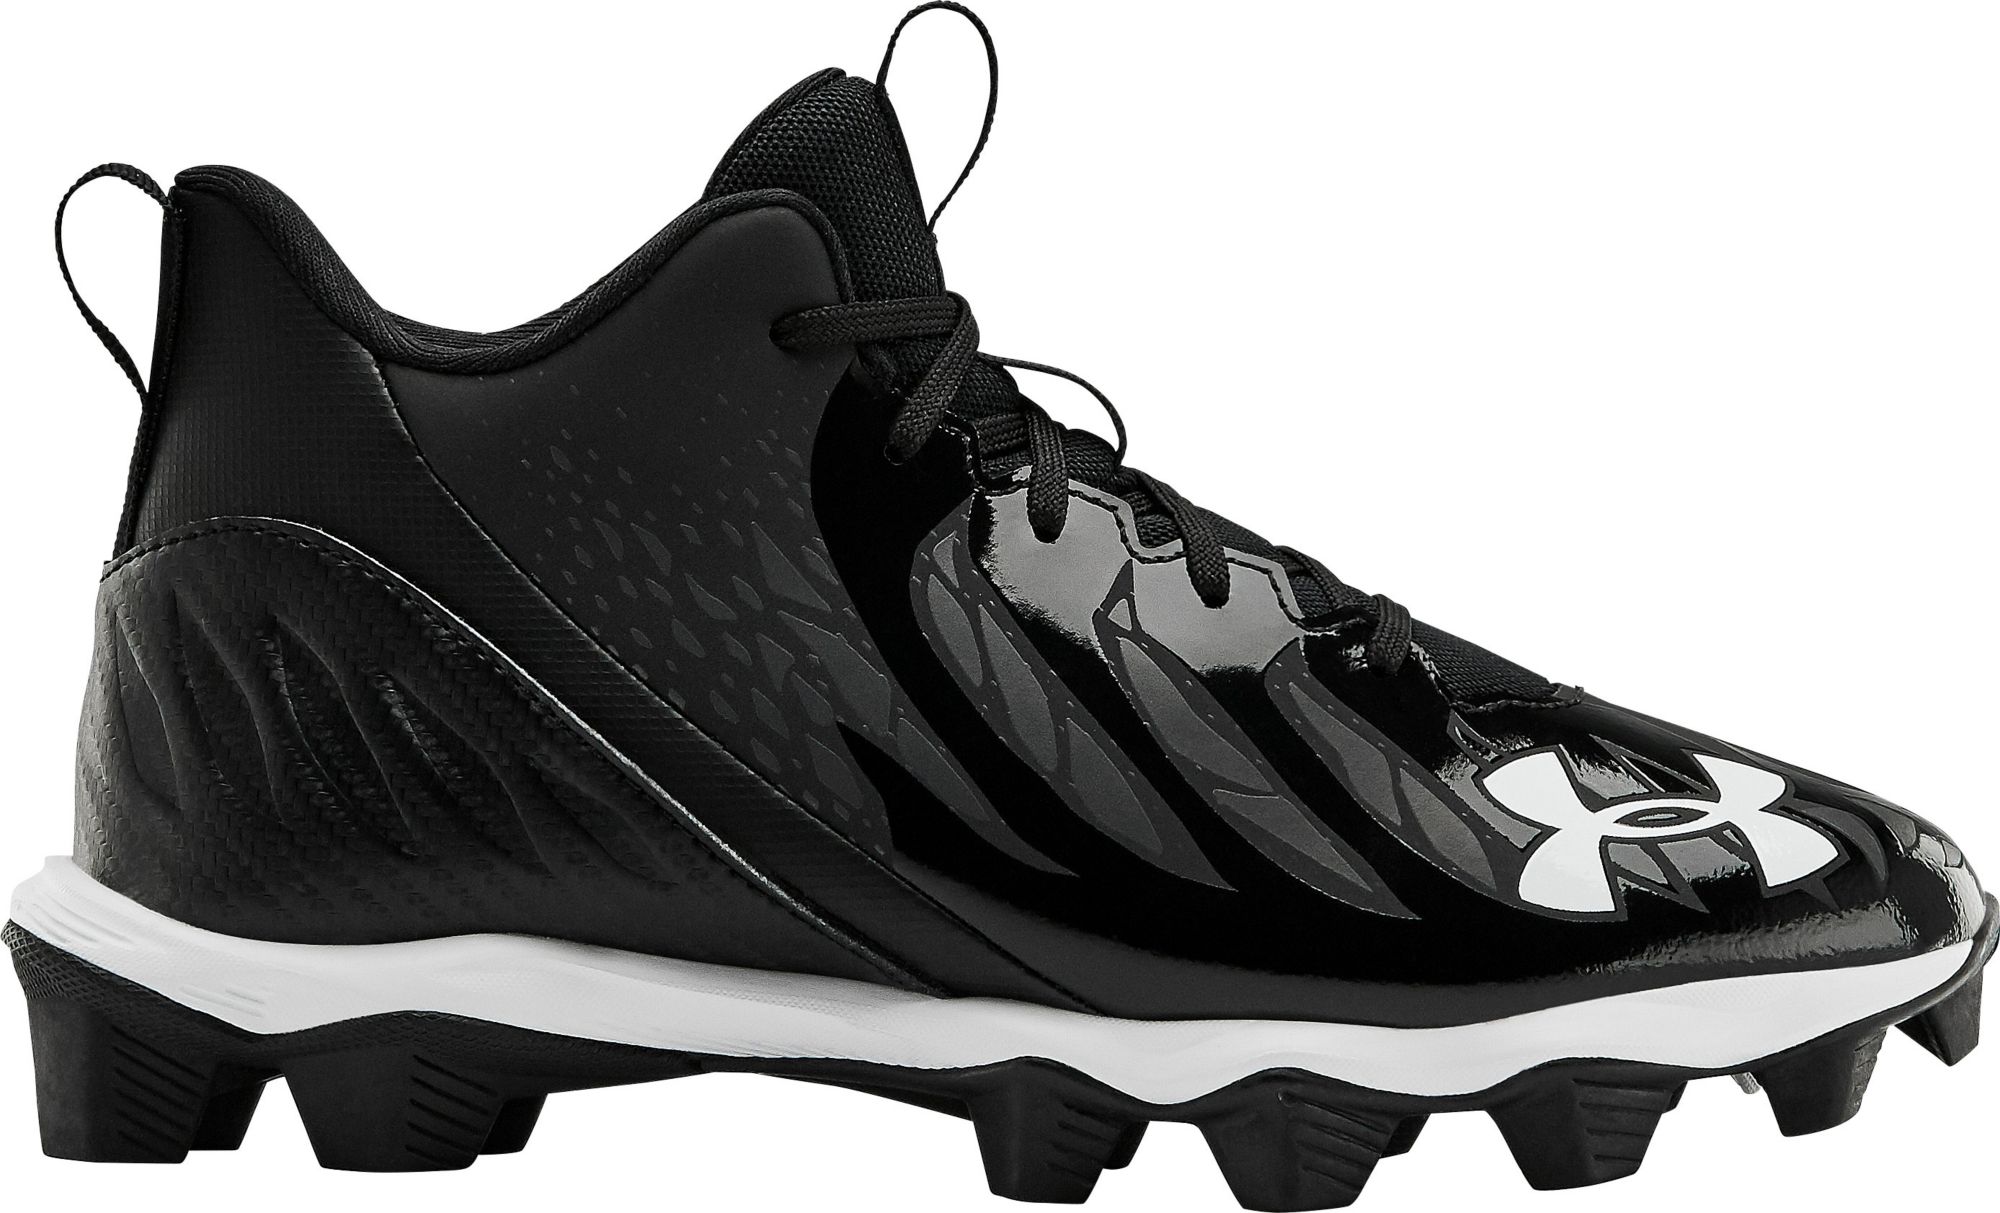 size 7 wide football cleats